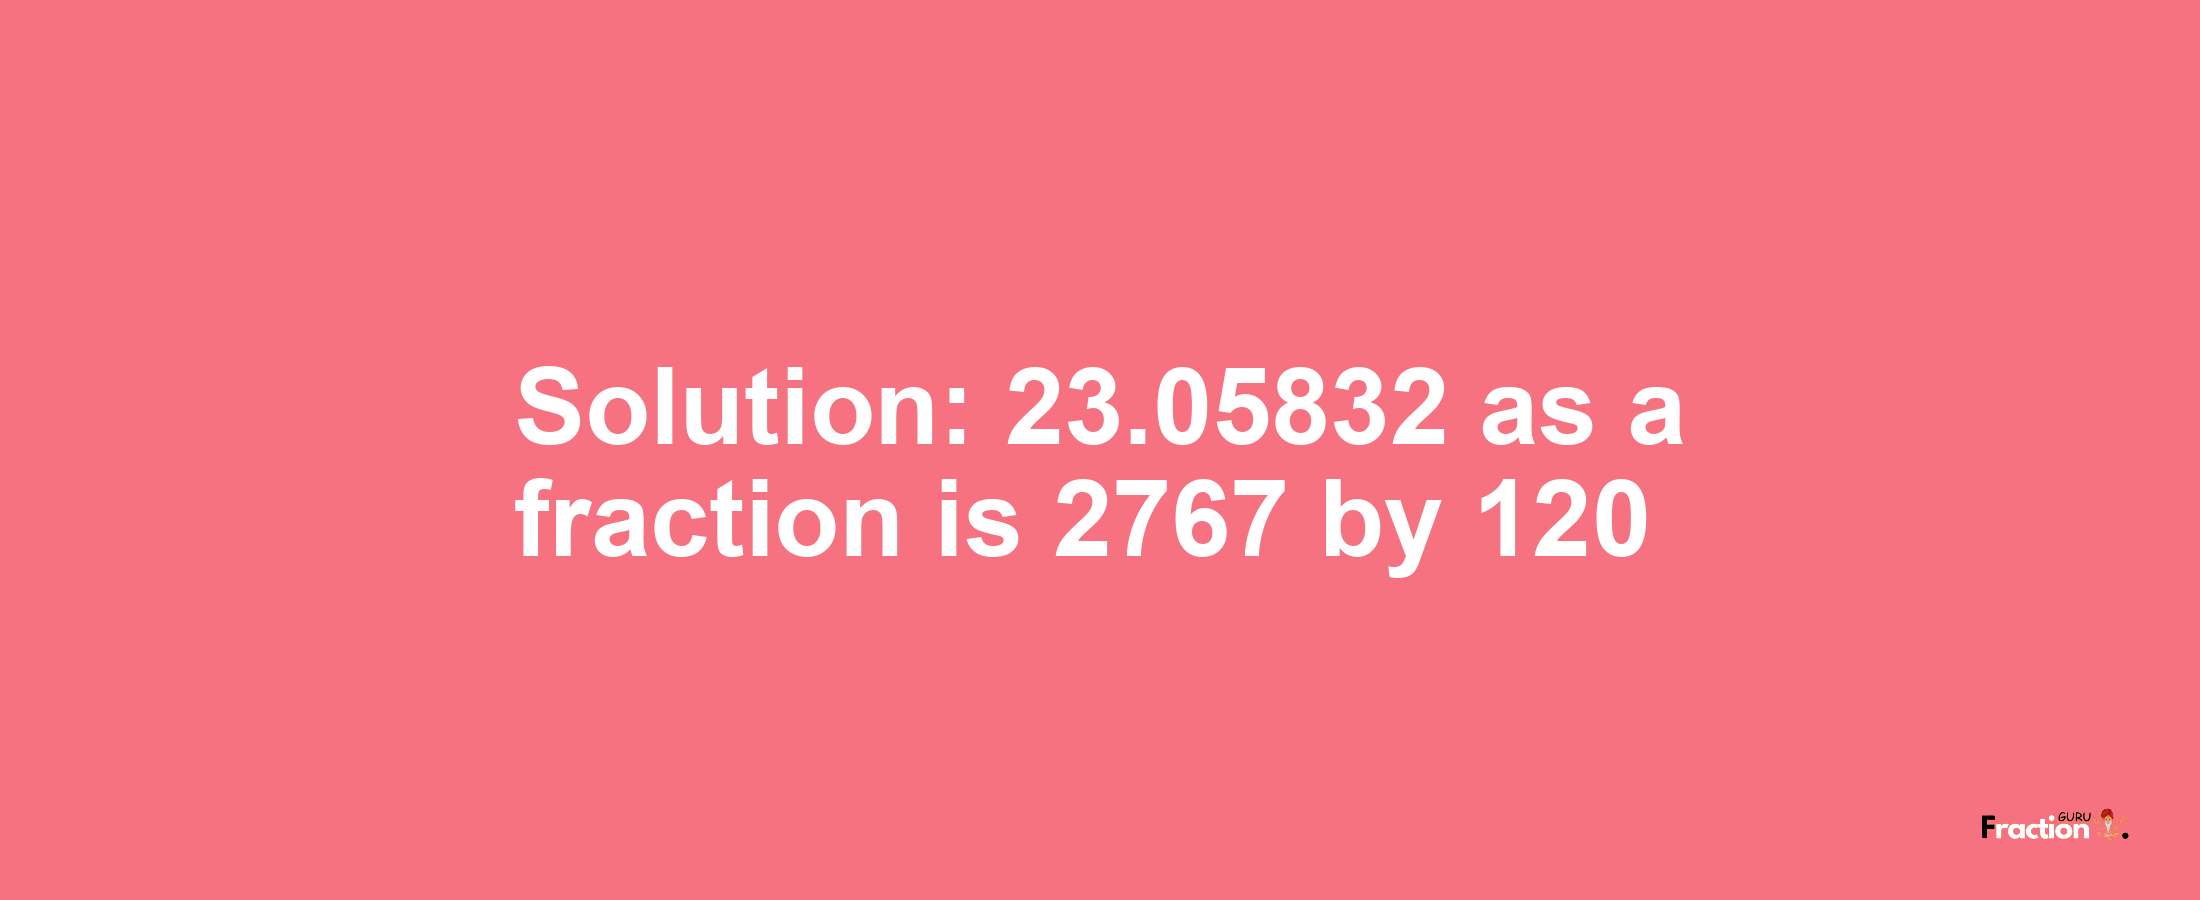 Solution:23.05832 as a fraction is 2767/120